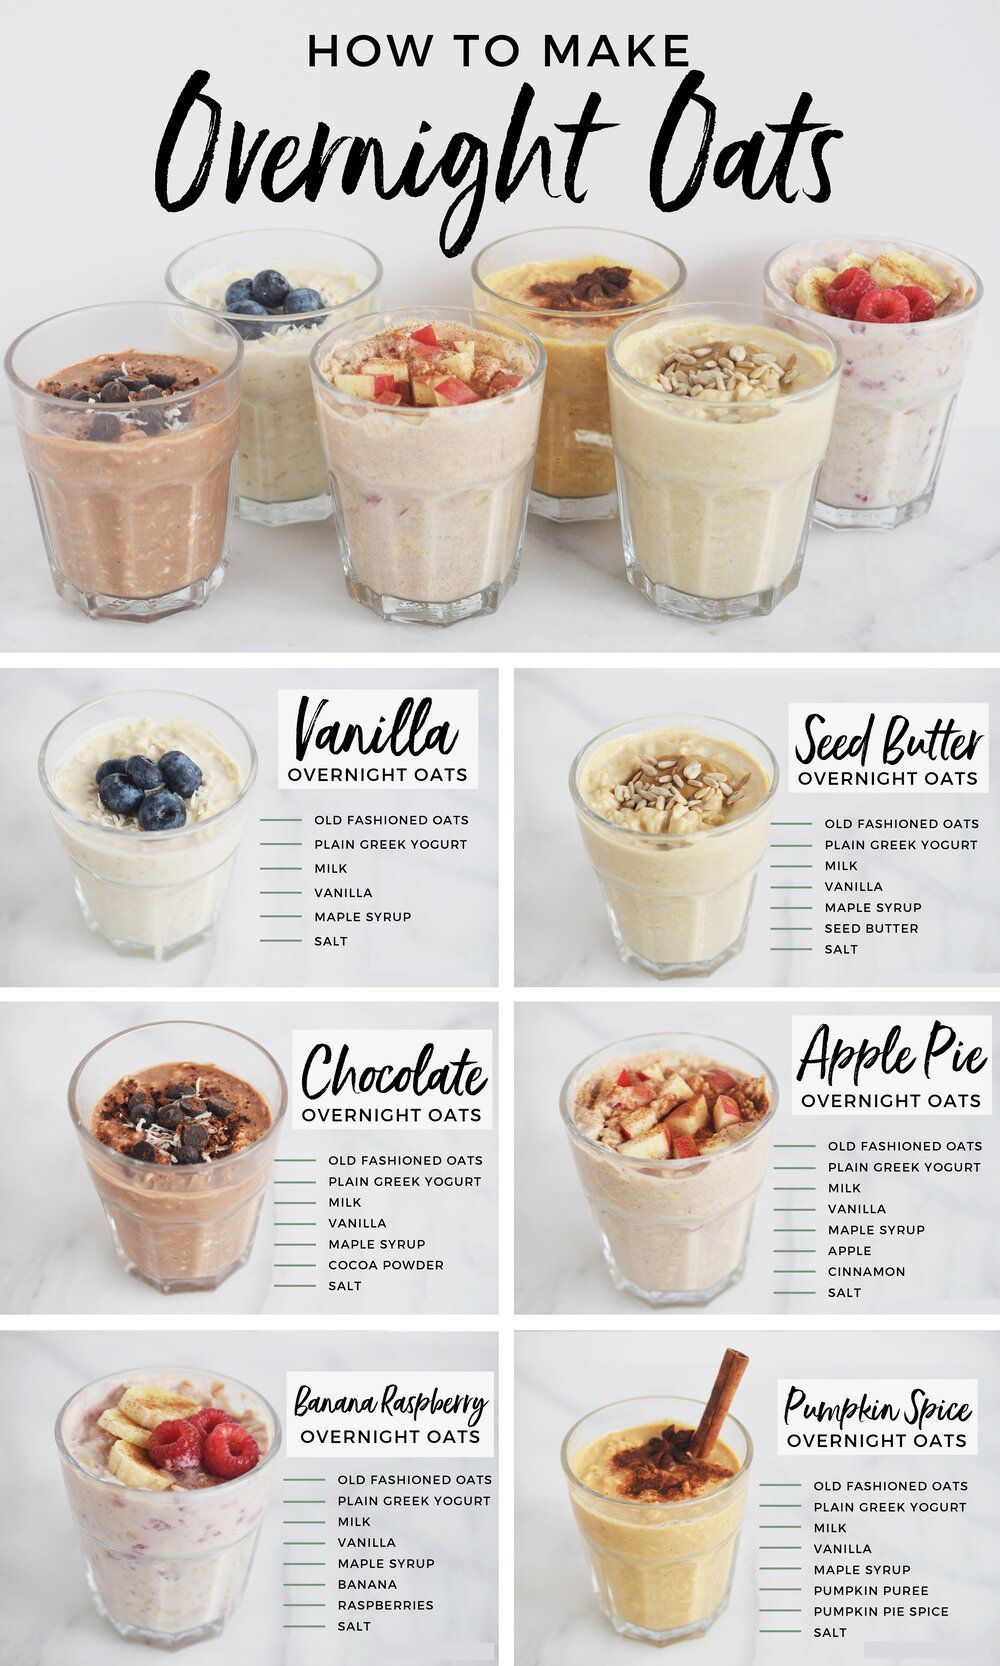 6 Overnight Oats Recipes You Should Know For Easy Breakfasts — Andianne -   18 healthy recipes On The Go clean eating ideas